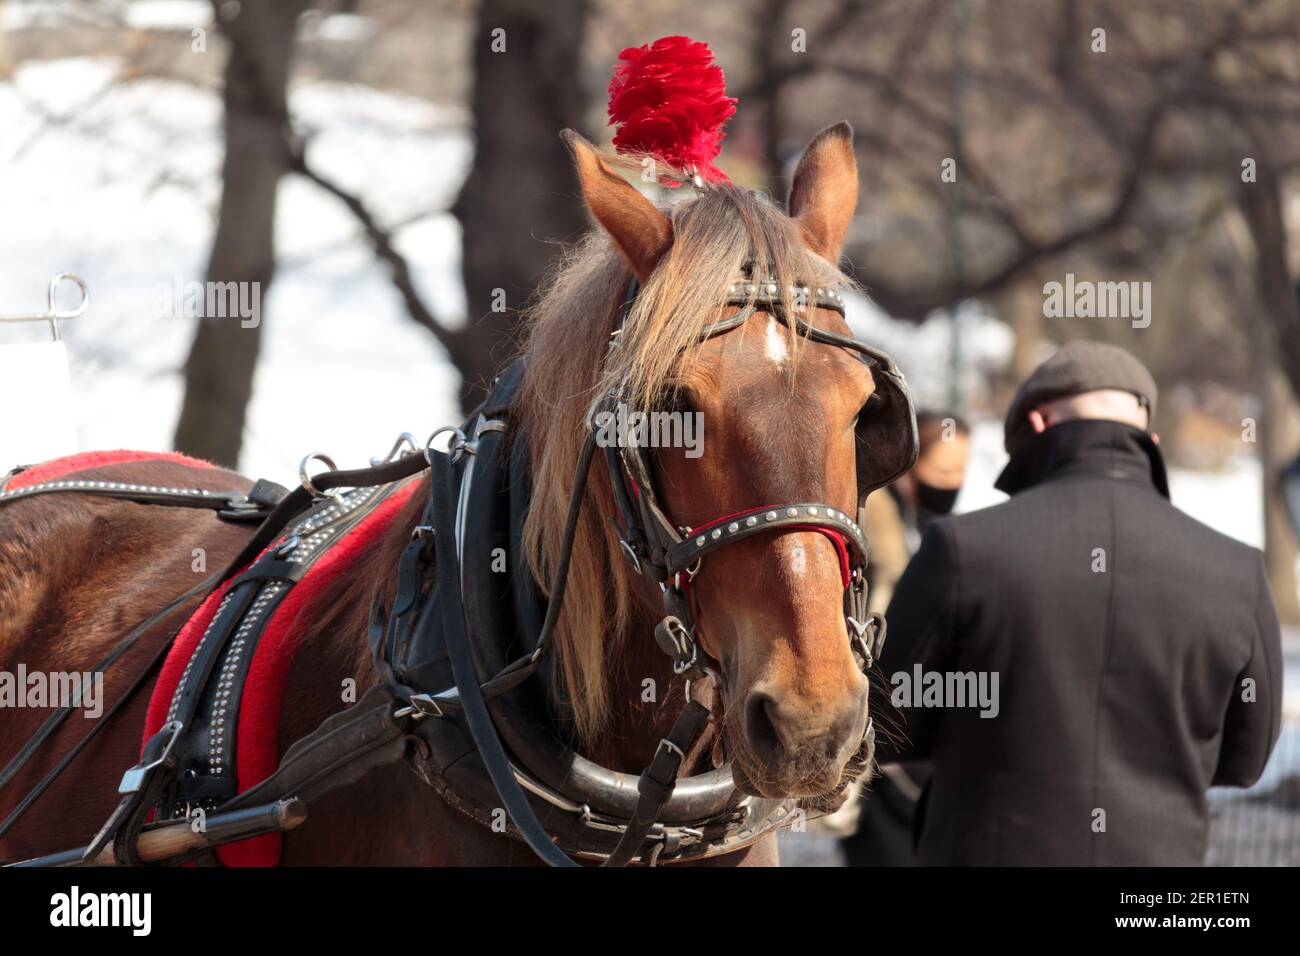 a carriage horse wearing a red decorative headdress and full head tack looks directly at the camera while standing in Central Park in Winter Stock Photo